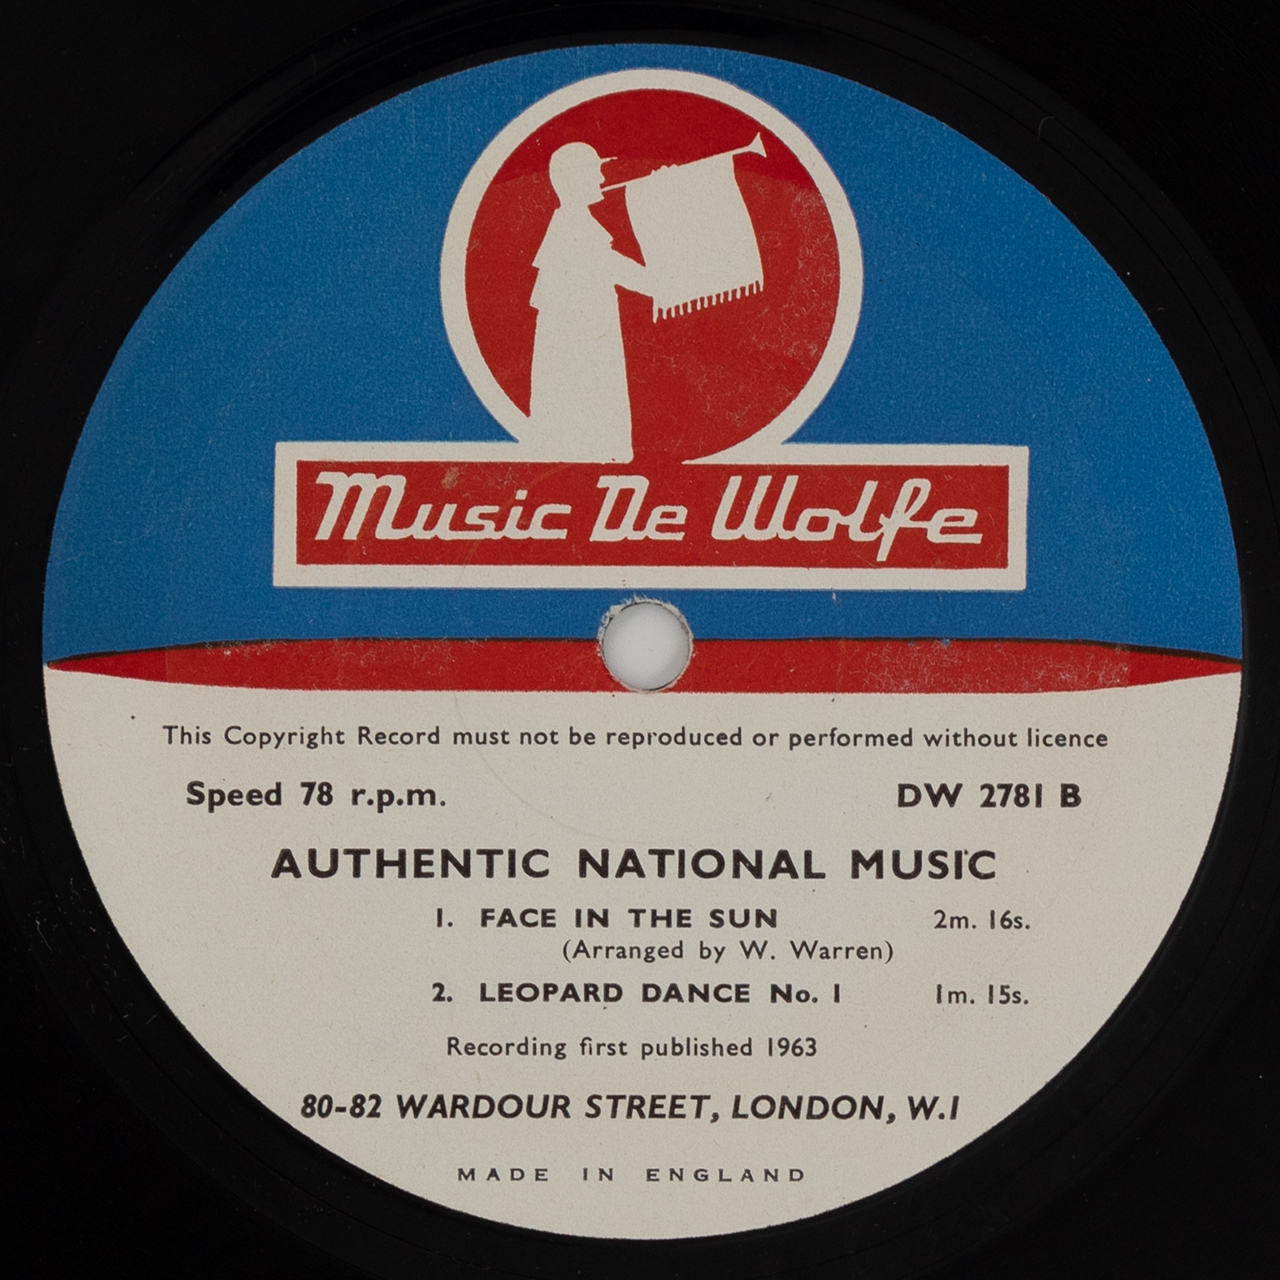 Authentic National Music